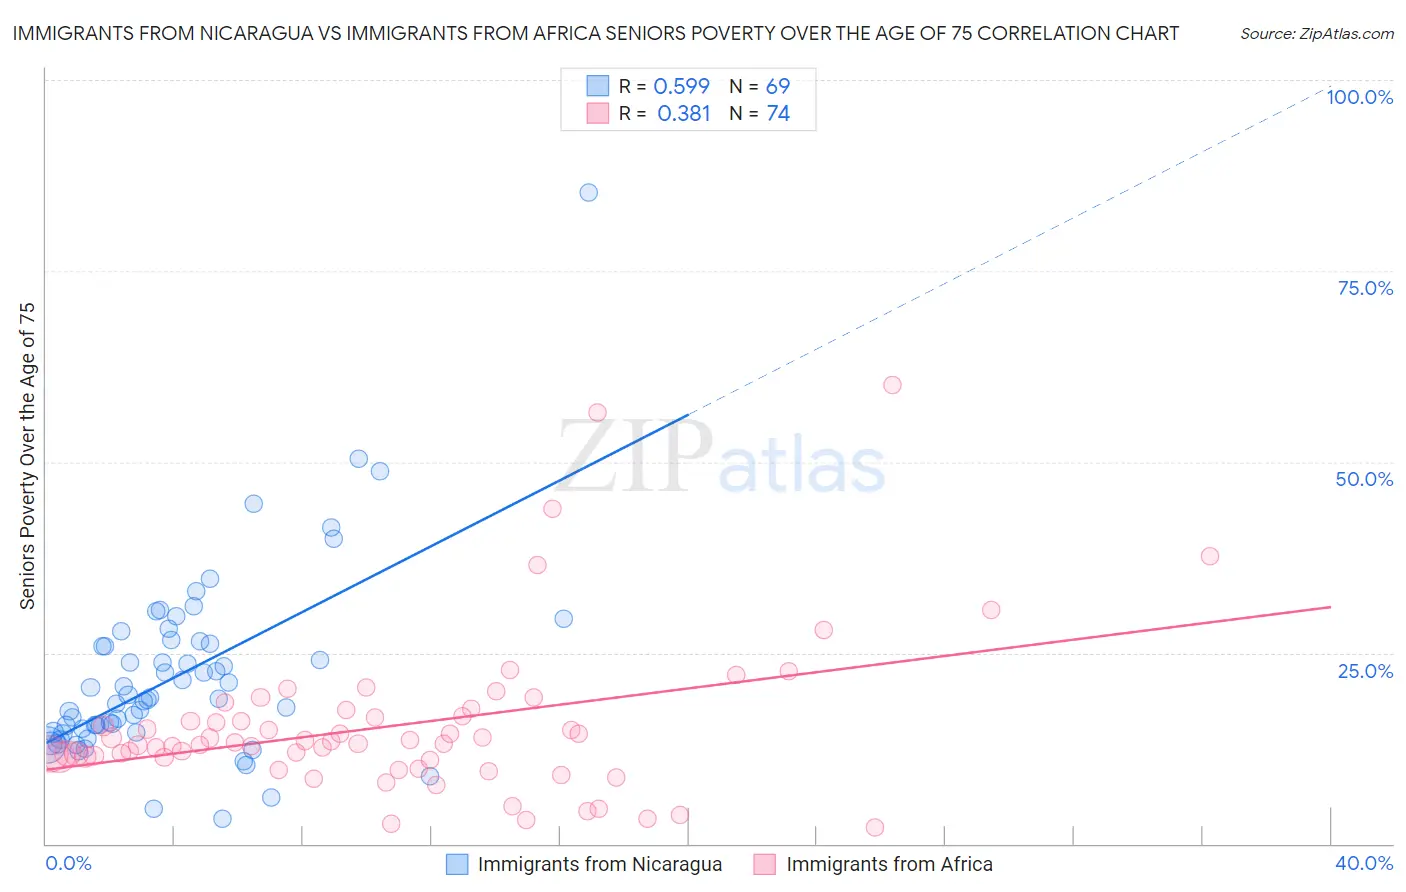 Immigrants from Nicaragua vs Immigrants from Africa Seniors Poverty Over the Age of 75